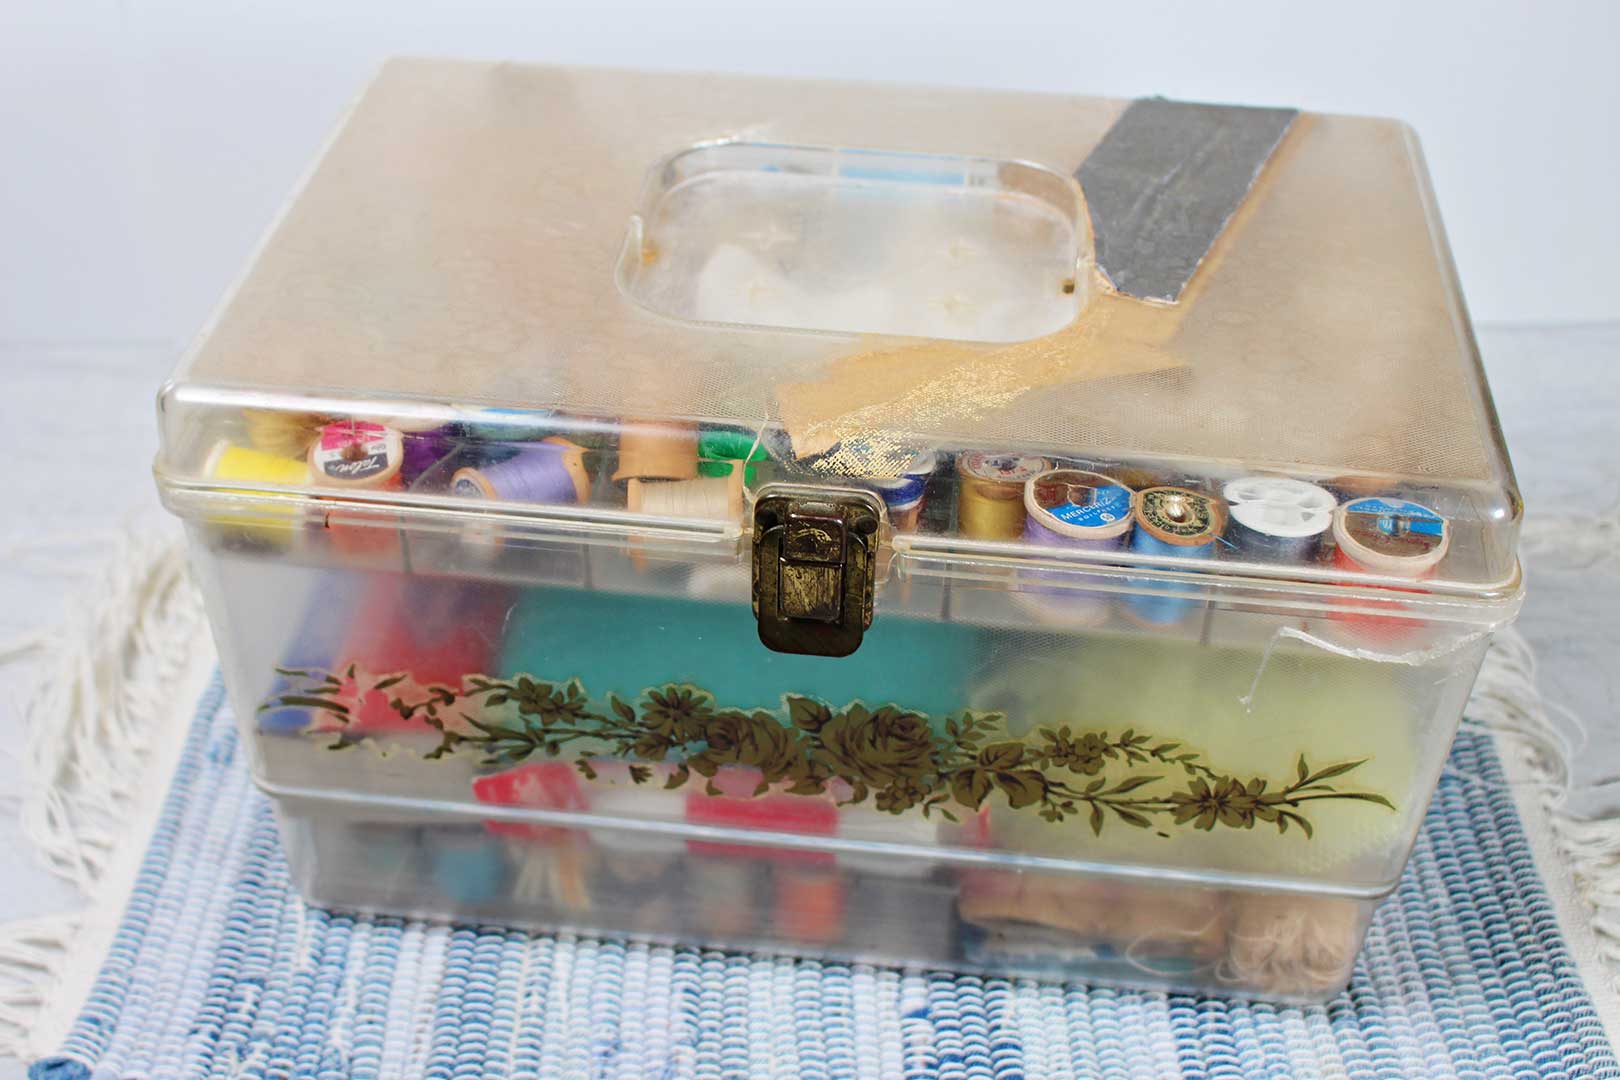 Vintage plastic sewing box filled with spools of thread and various sewing tools.